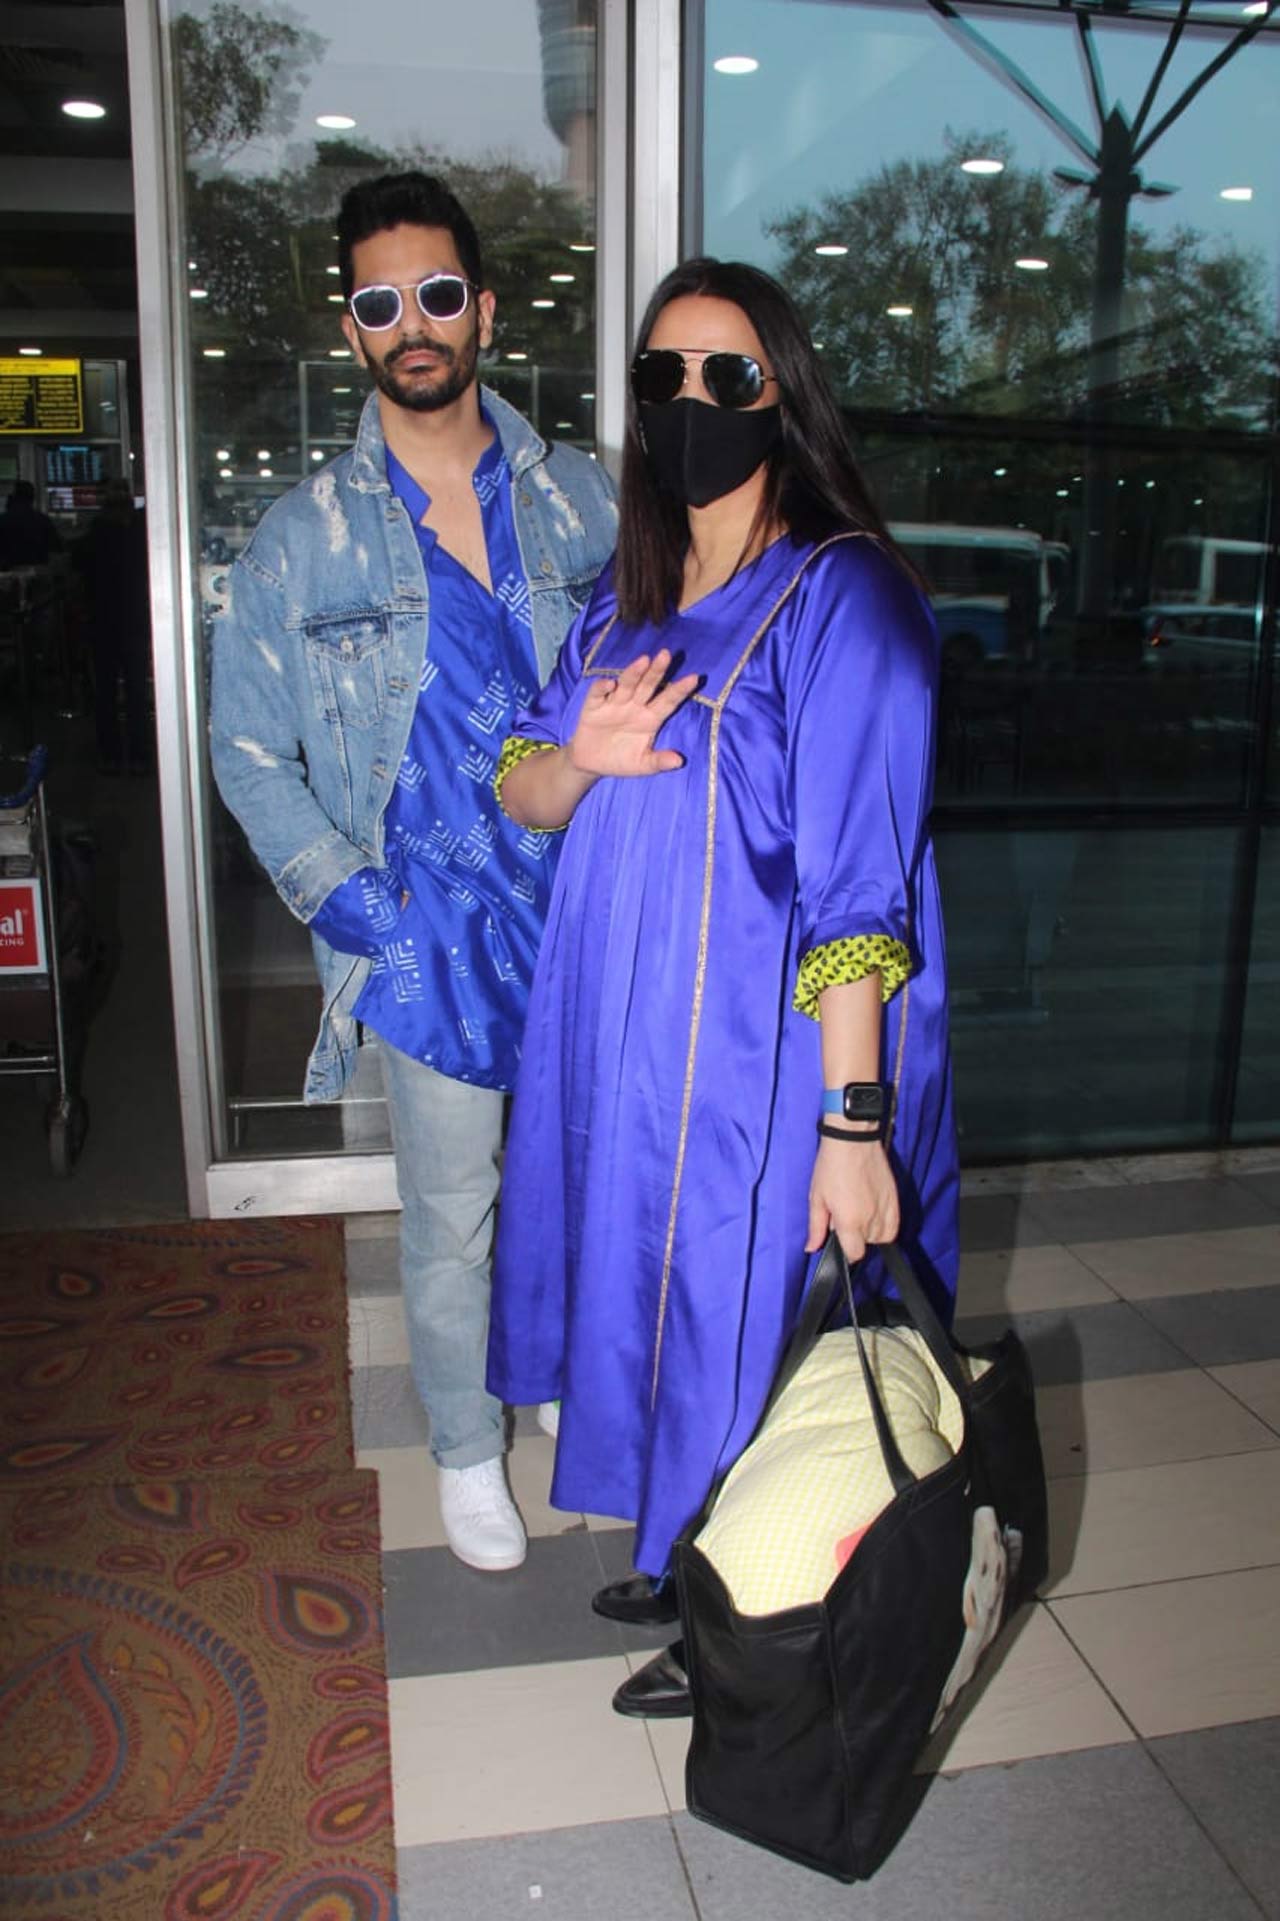 Bollywood power couple Angad Bedi and Neha Dhupia were also snapped posing for the shutterbugs as they left to attend the wedding. The duo's name has been circulating online as one of the special guests at the ceremony. Angad and Neha were seen twinning in blue silk outfits. 